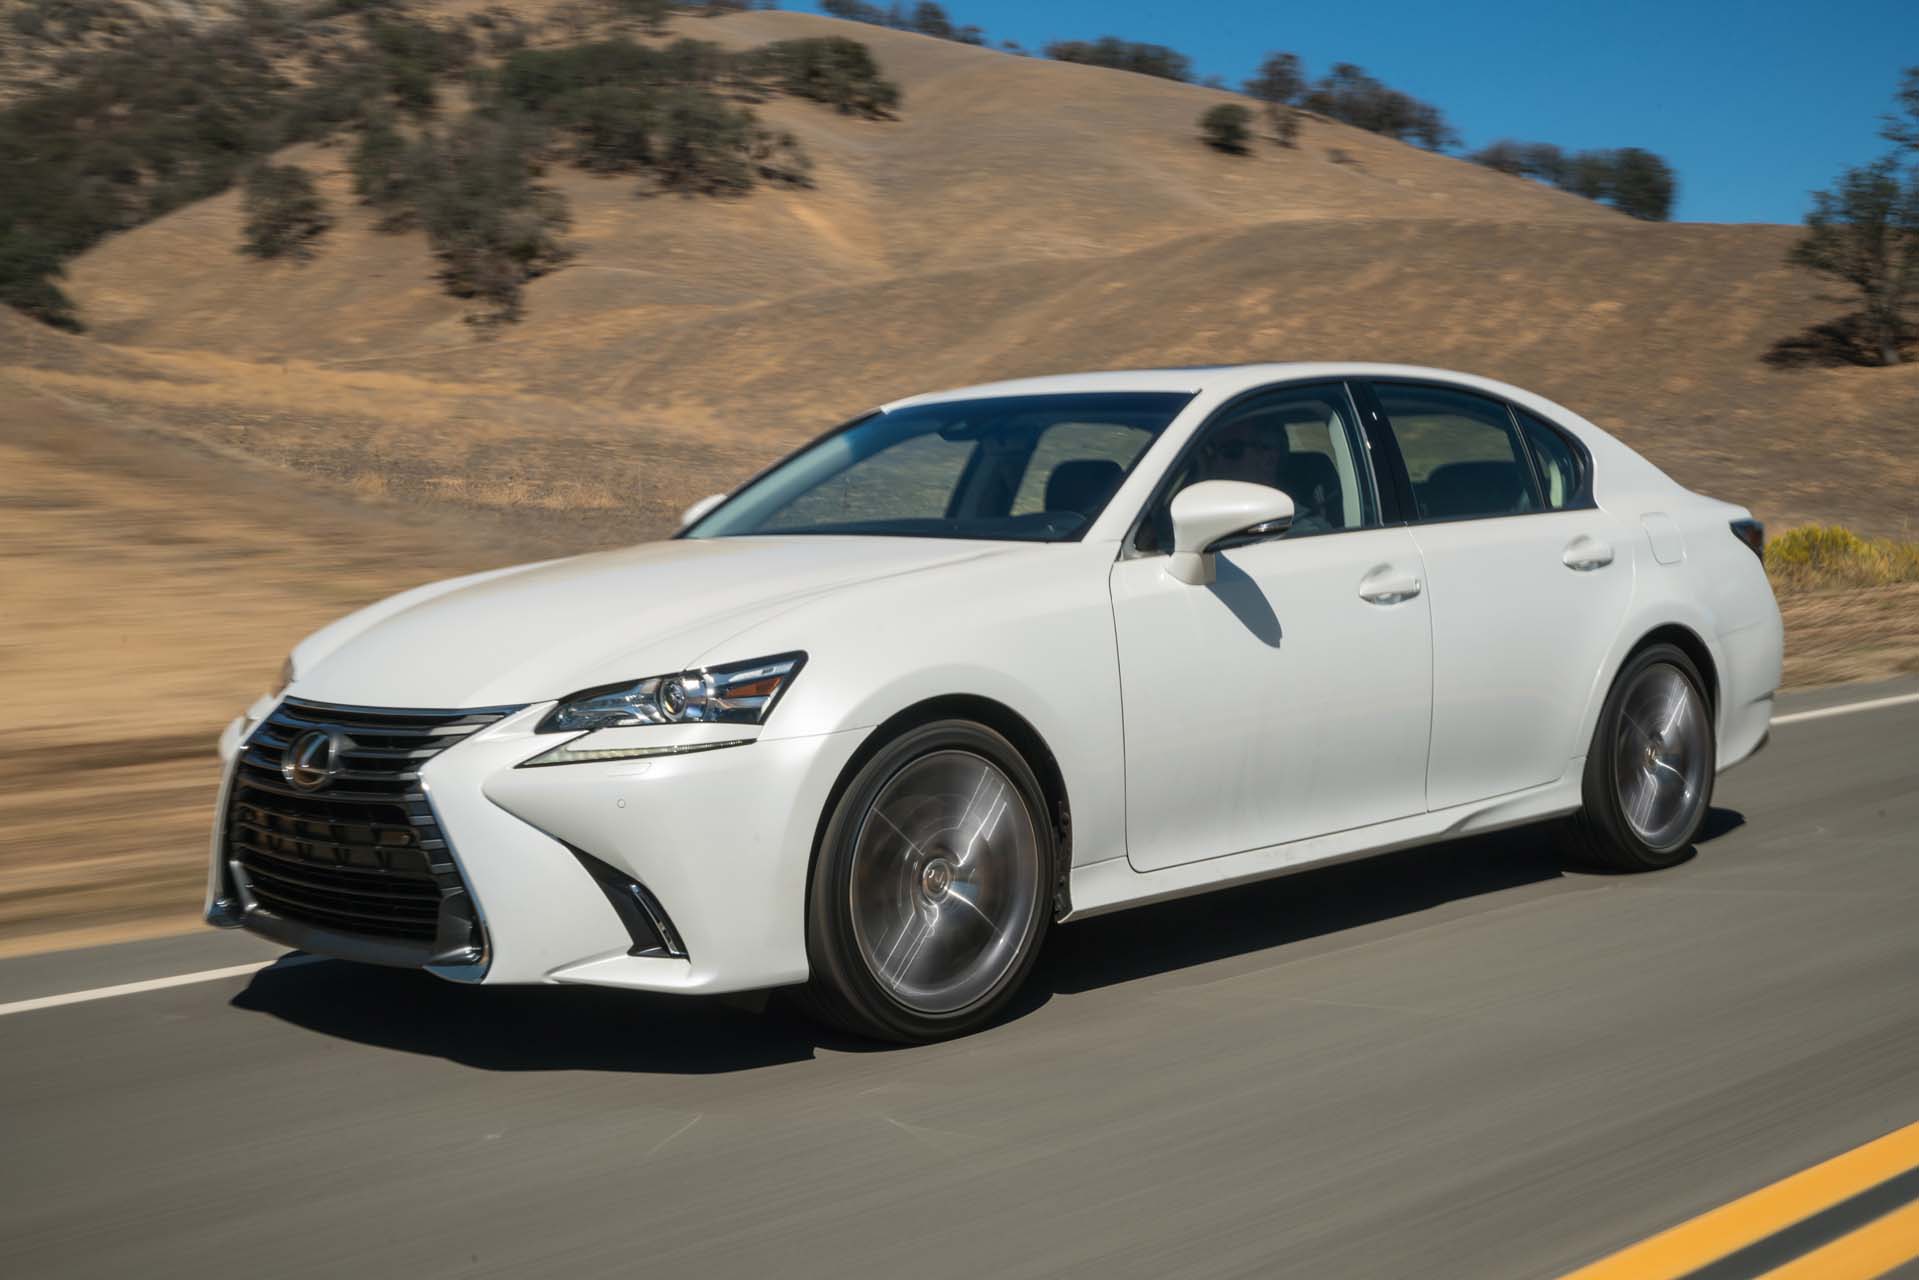 New And Used Lexus Gs Prices Photos Reviews Specs The Car Connection